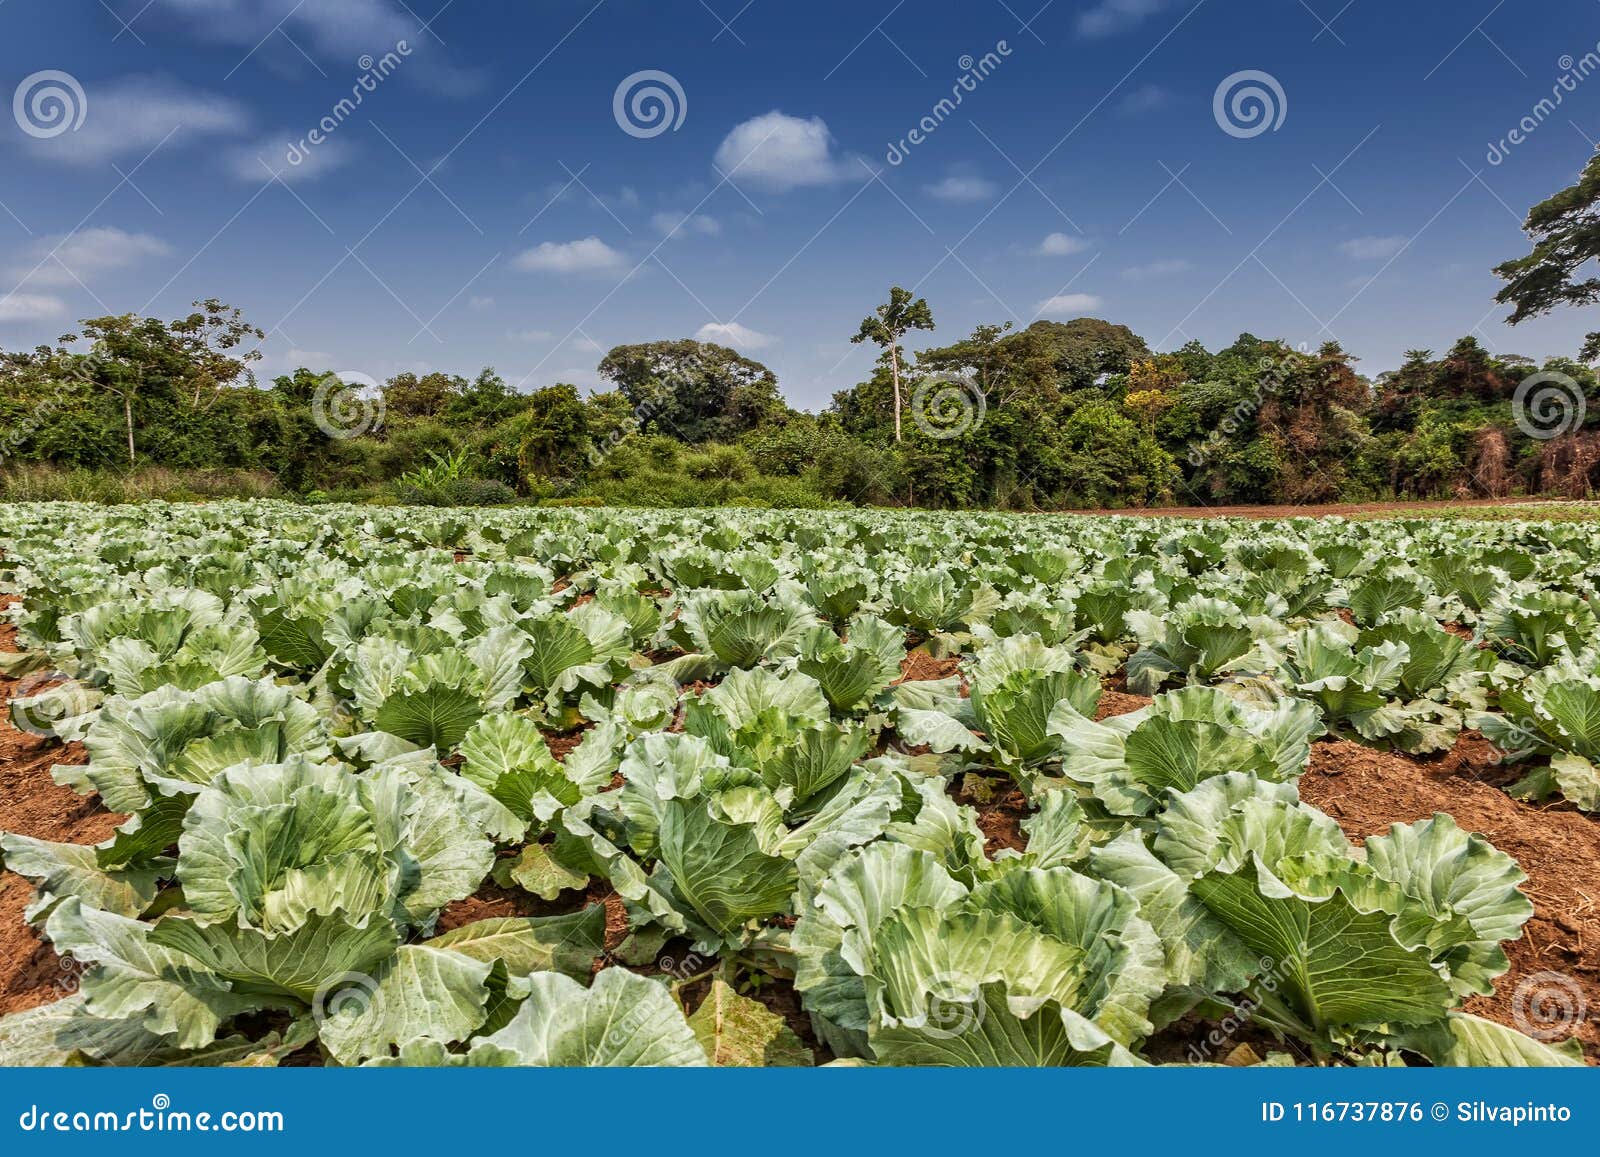 rural plantation of cabbages in the middle of the cabinda jungle. angola, africa.